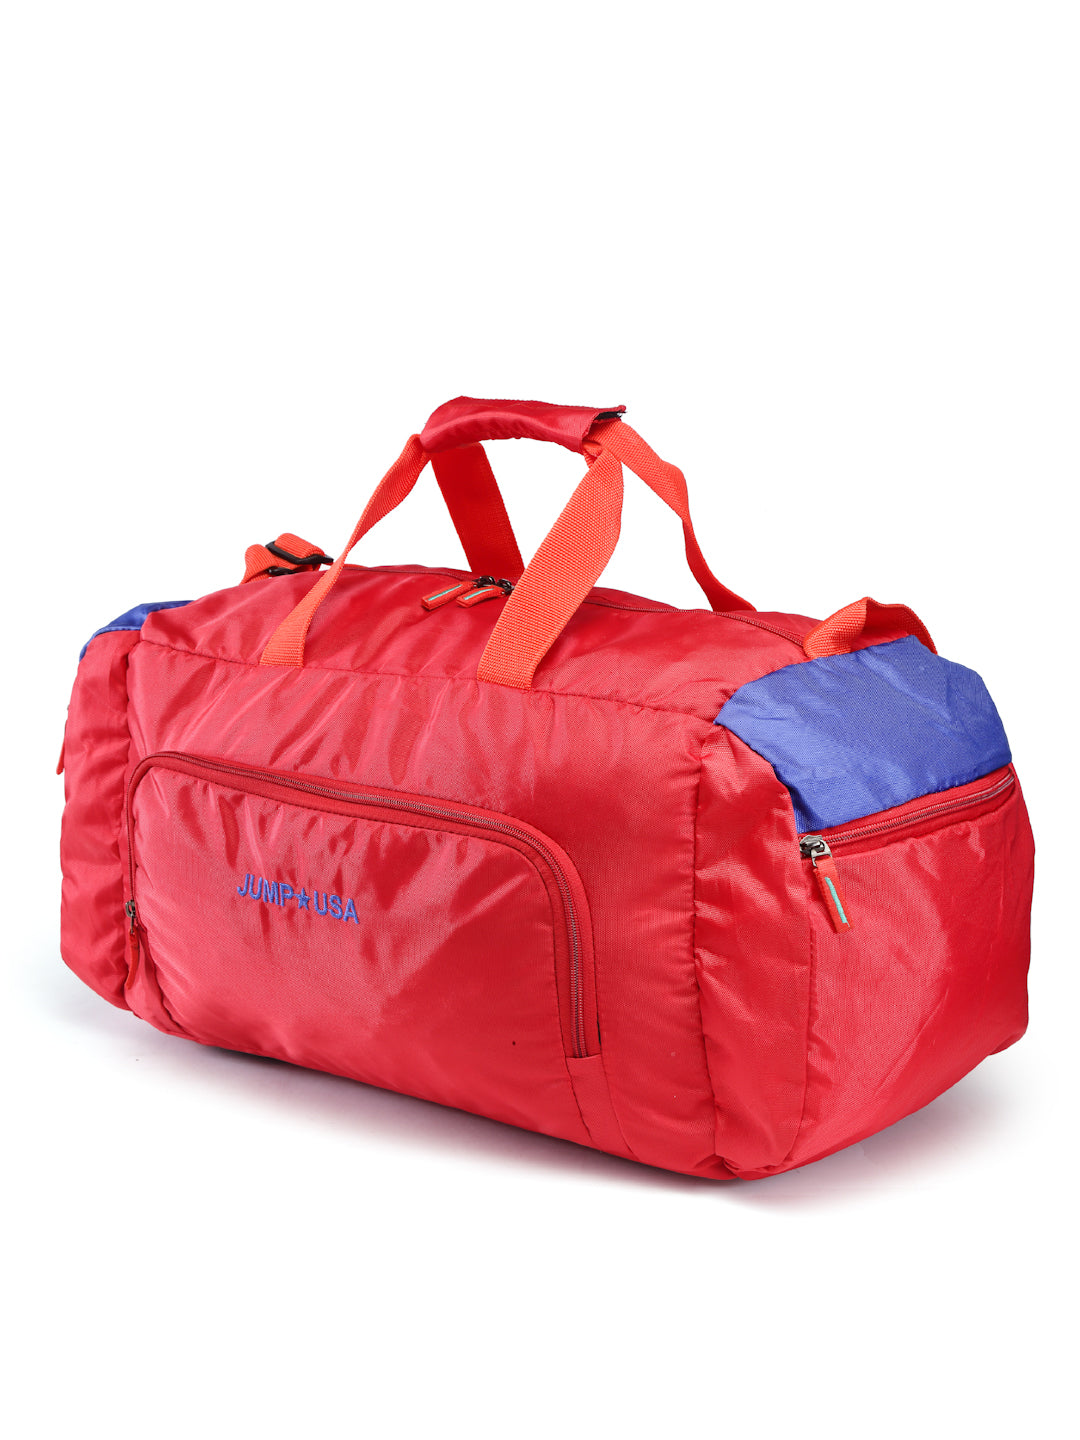 JUMP USA Unisex Red & Royal Blue Solid Hand Duffle Bag